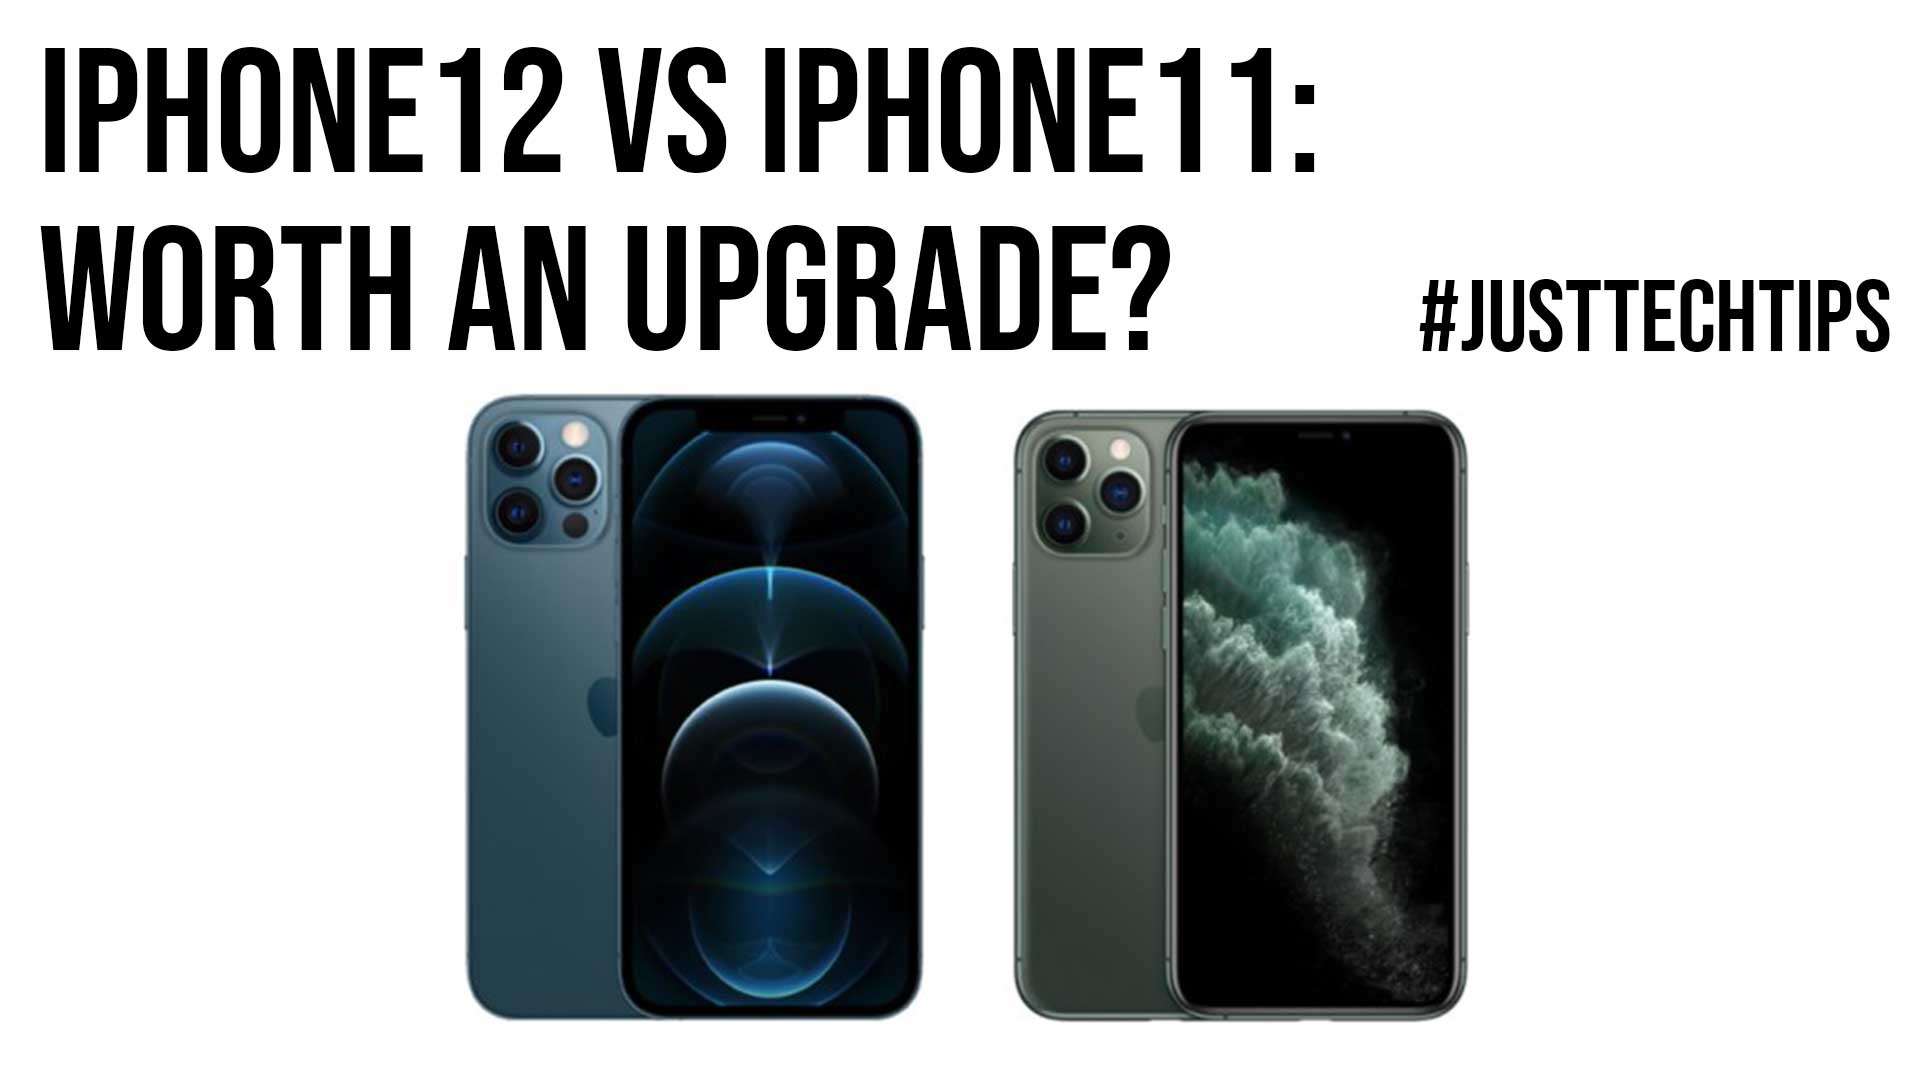 iPhone12 vs iPhone11 Worth an Upgrade